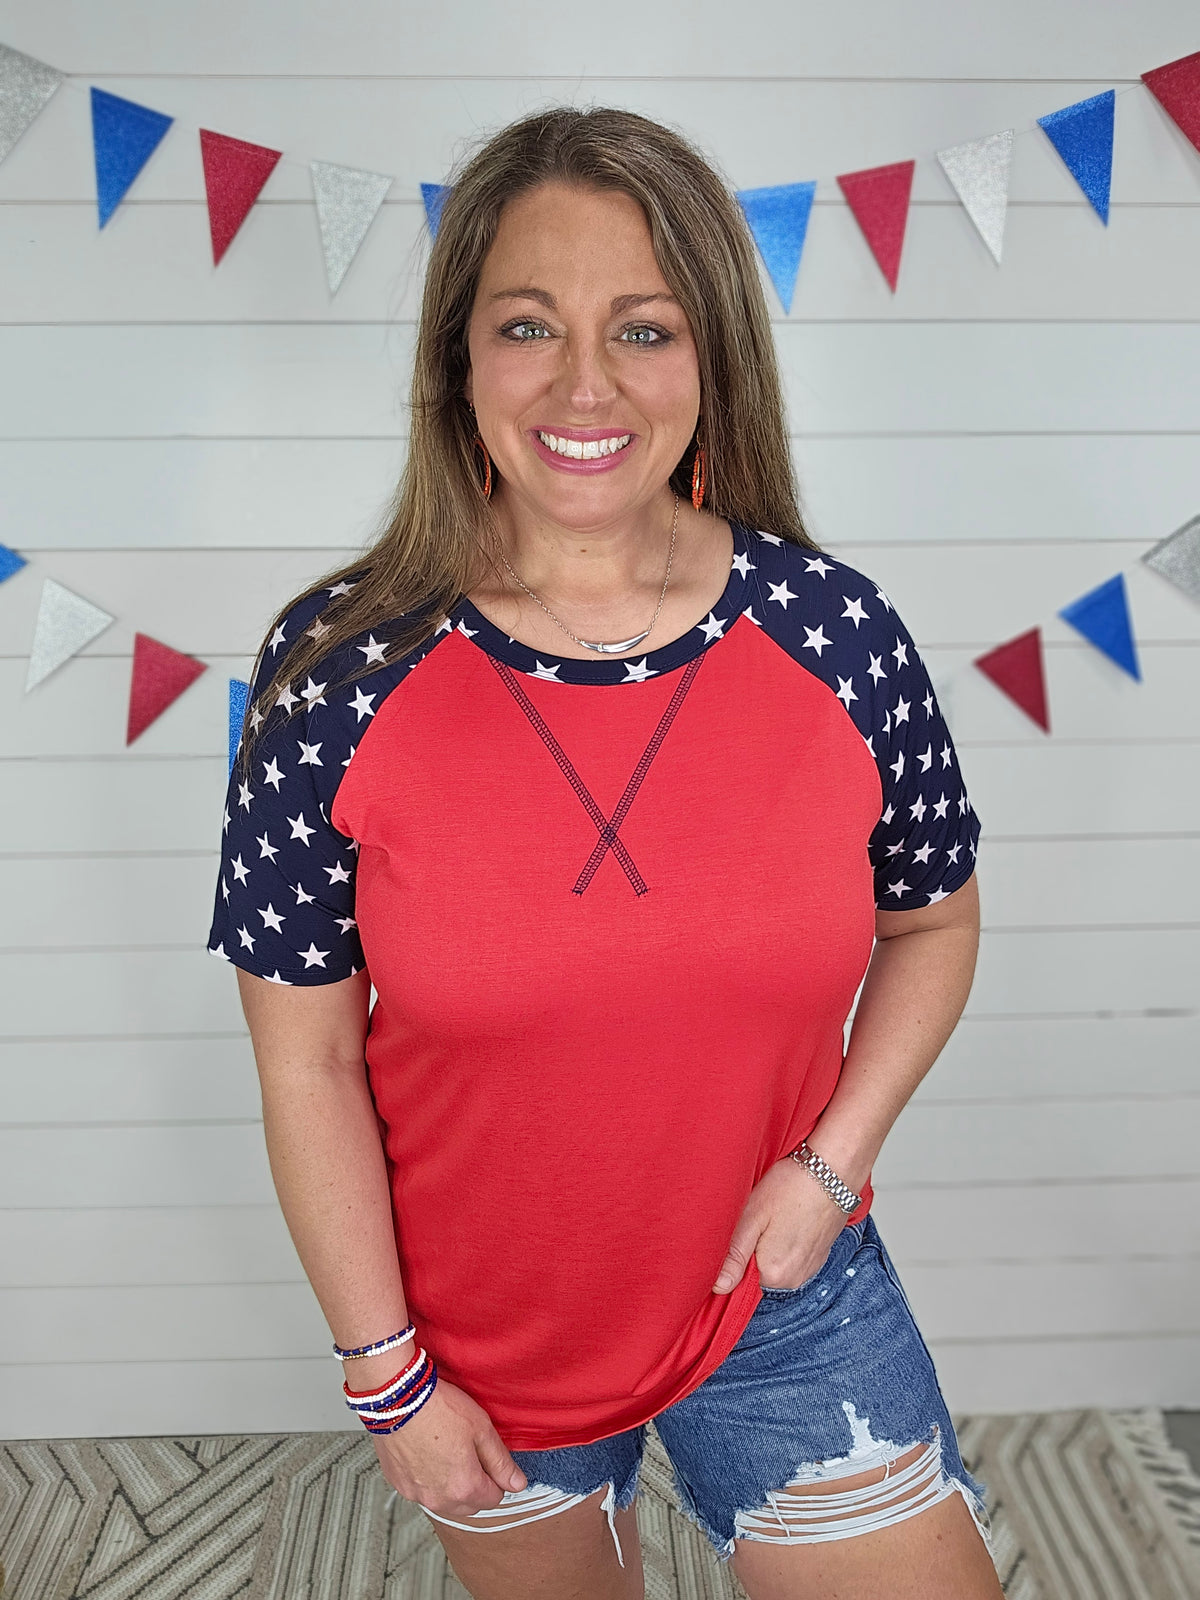 RED KNIT TOP W/ BLUE STAR SLEEVES